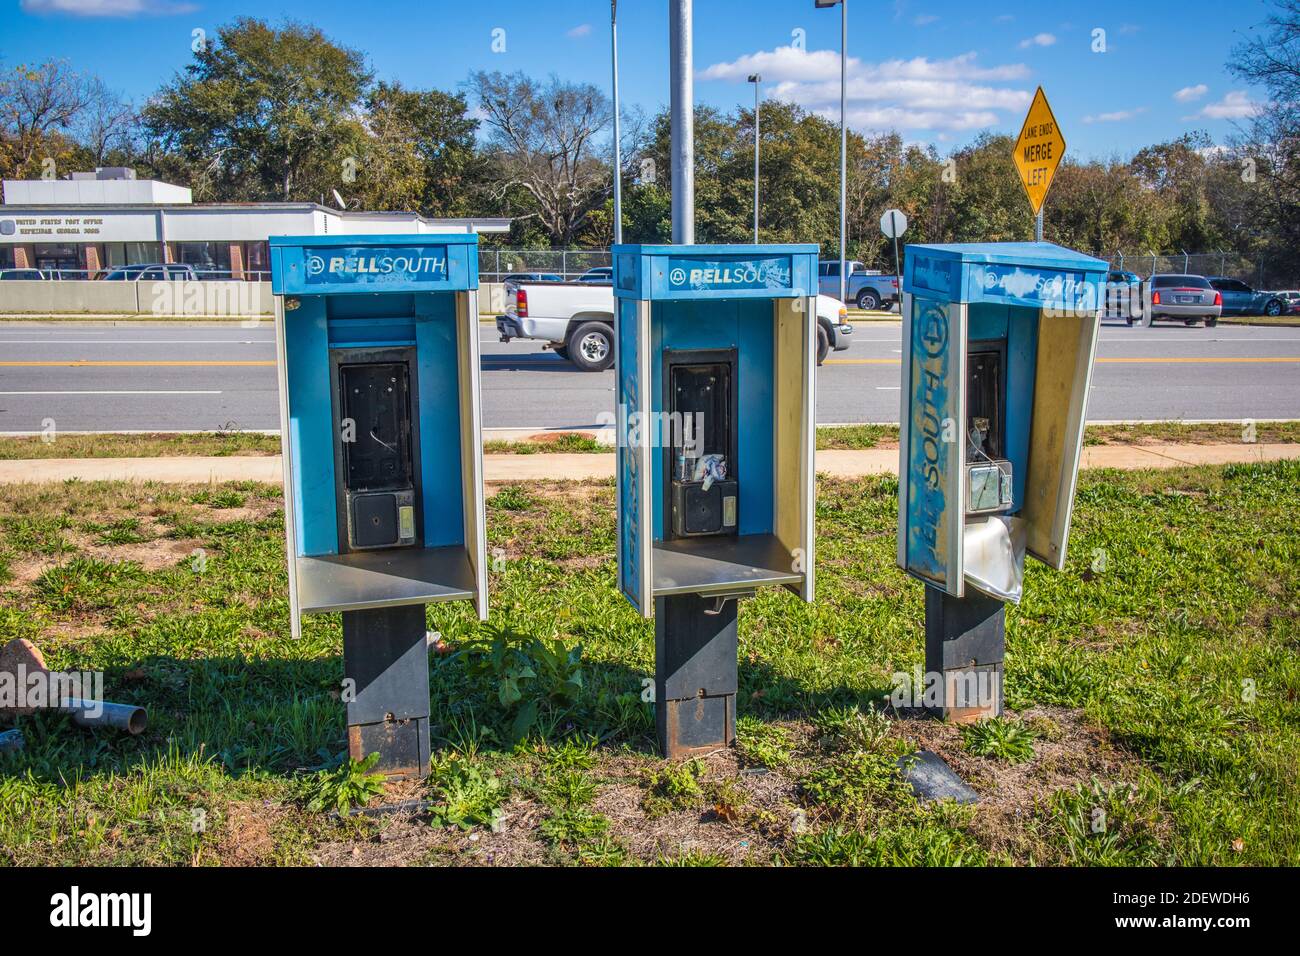 Hephzibah, Ga USA - 12 01 20: A row of old payphone booths with the phone missing vintage Stock Photo